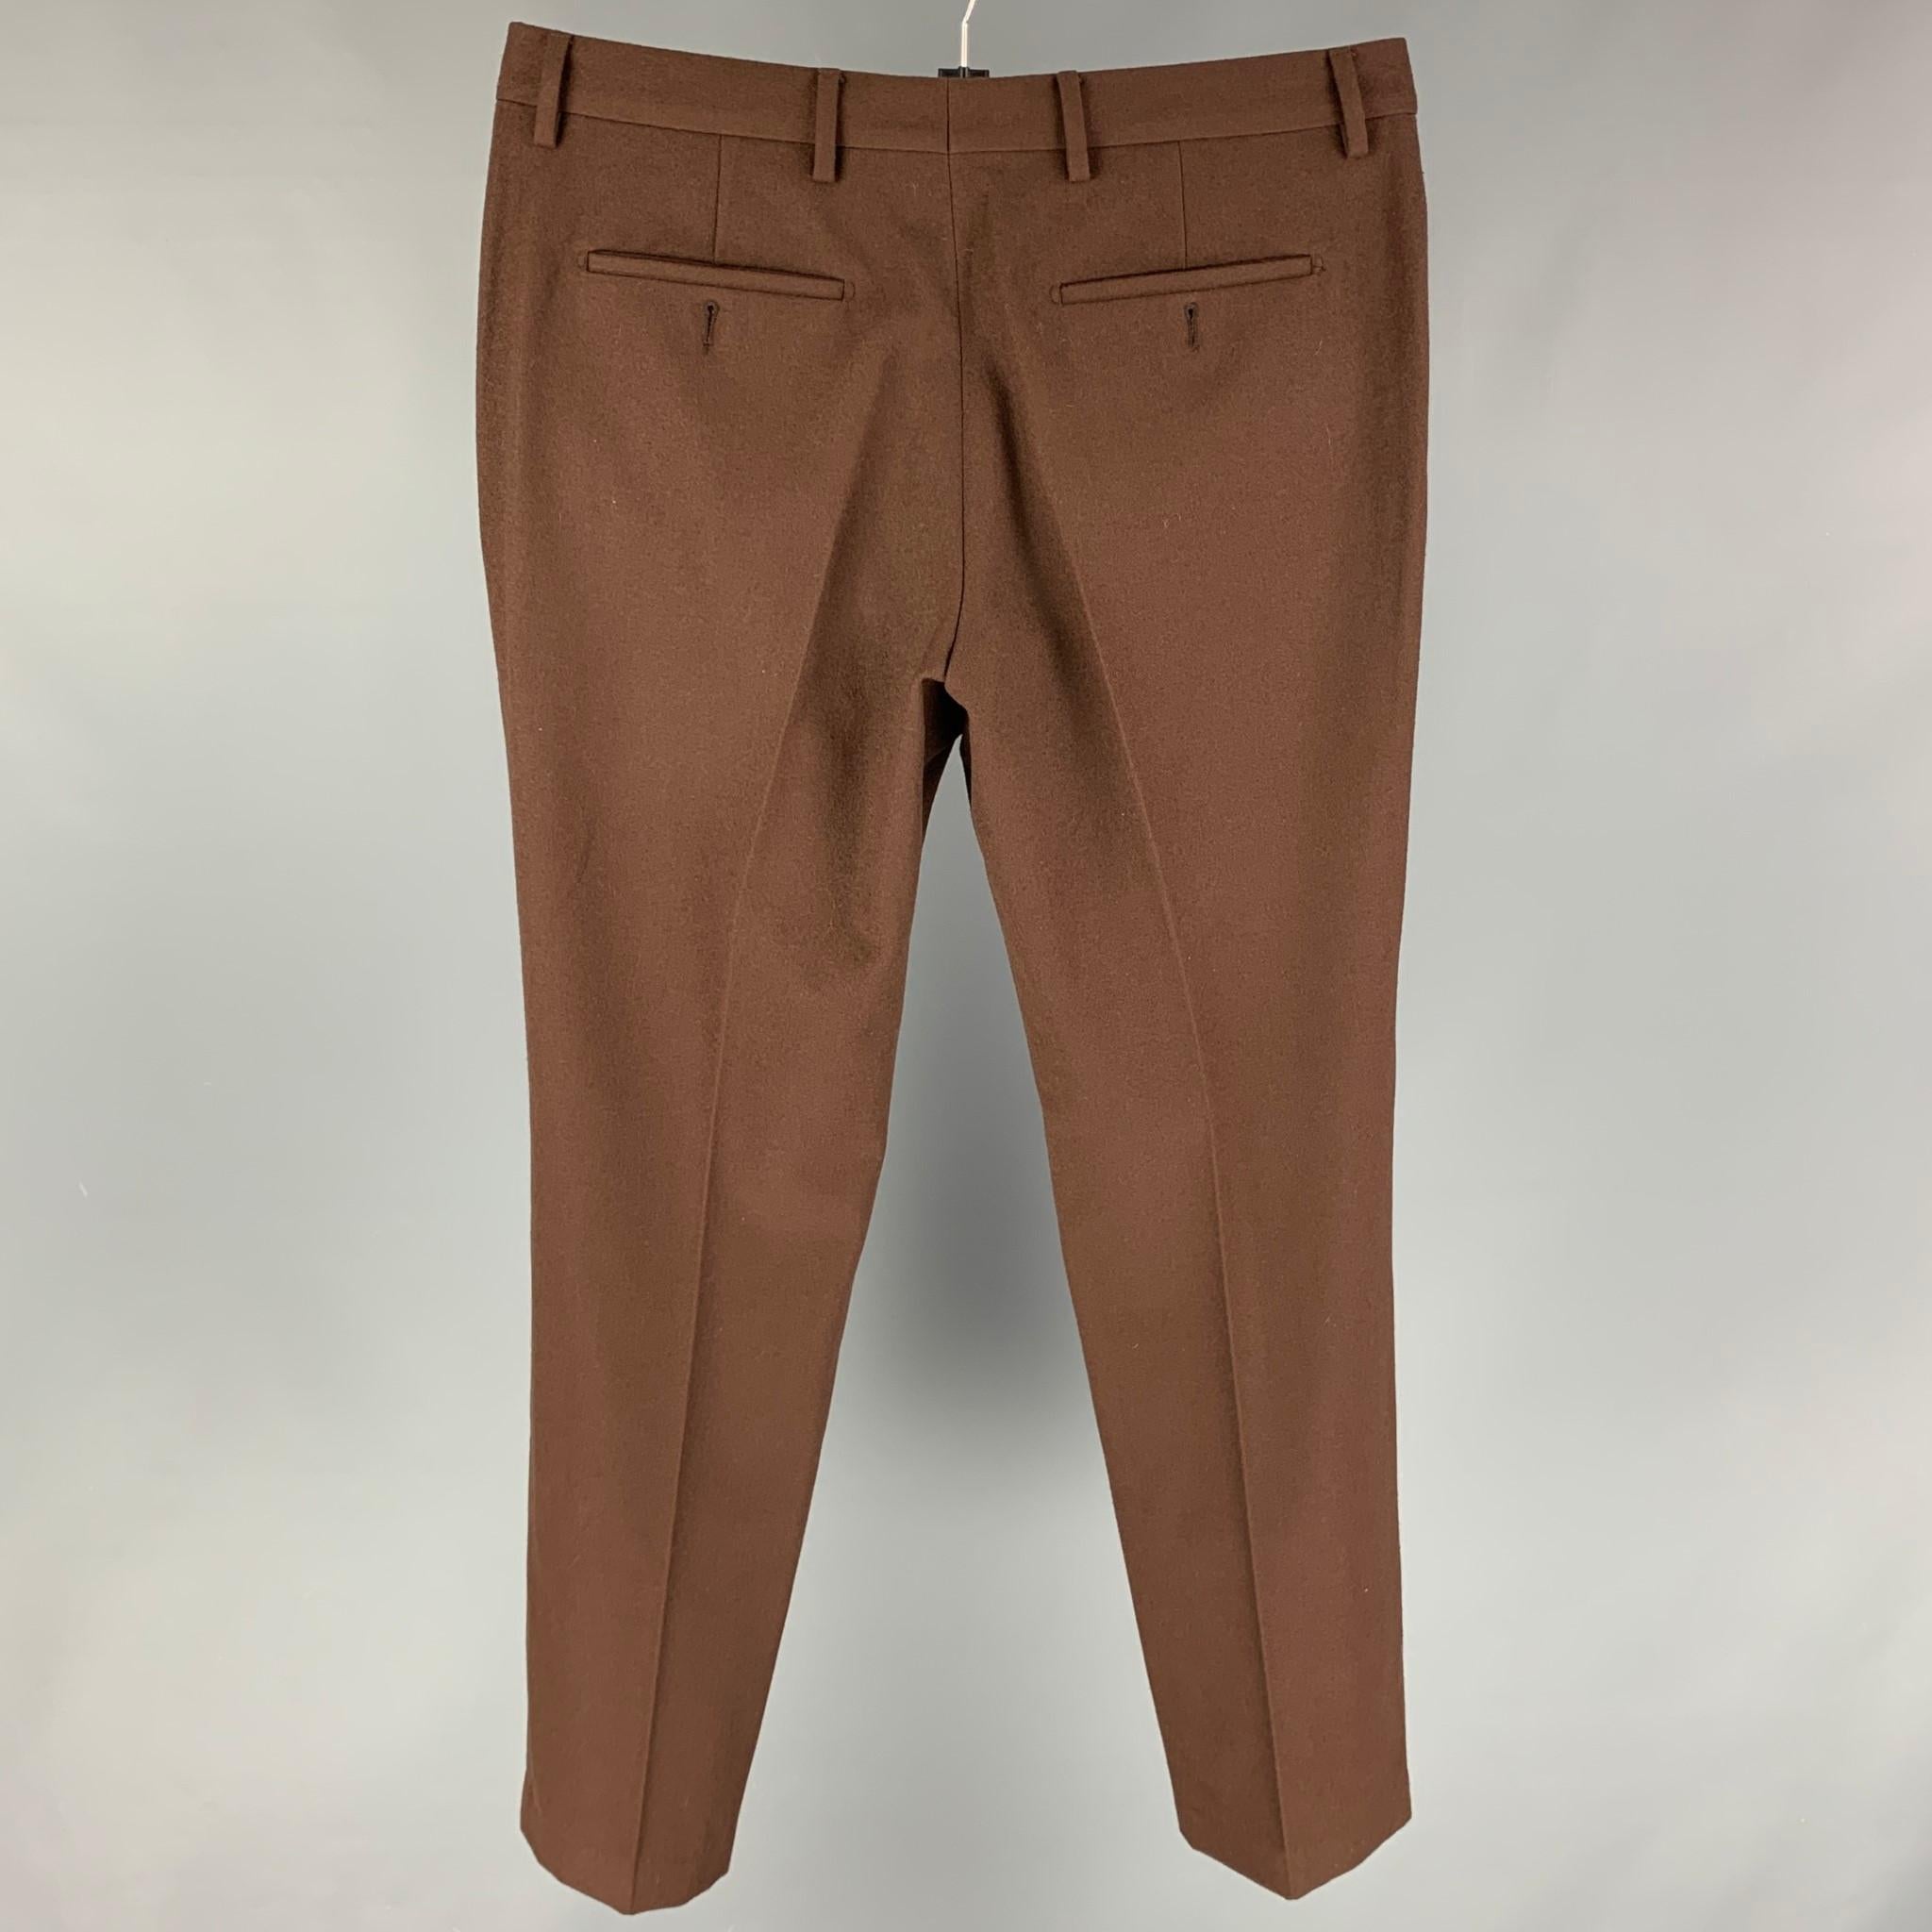 GIVENCHY By Ricardo Tisci 2012 dress pants comes in a brown wool featuring a flat front, straight leg, front tab, and a zip fly closure. Made in Italy.

Excellent Pre-Owned Condition.
Marked: 44

Measurements:

Waist: 34 in.
Rise: 10.5 in.
Inseam: